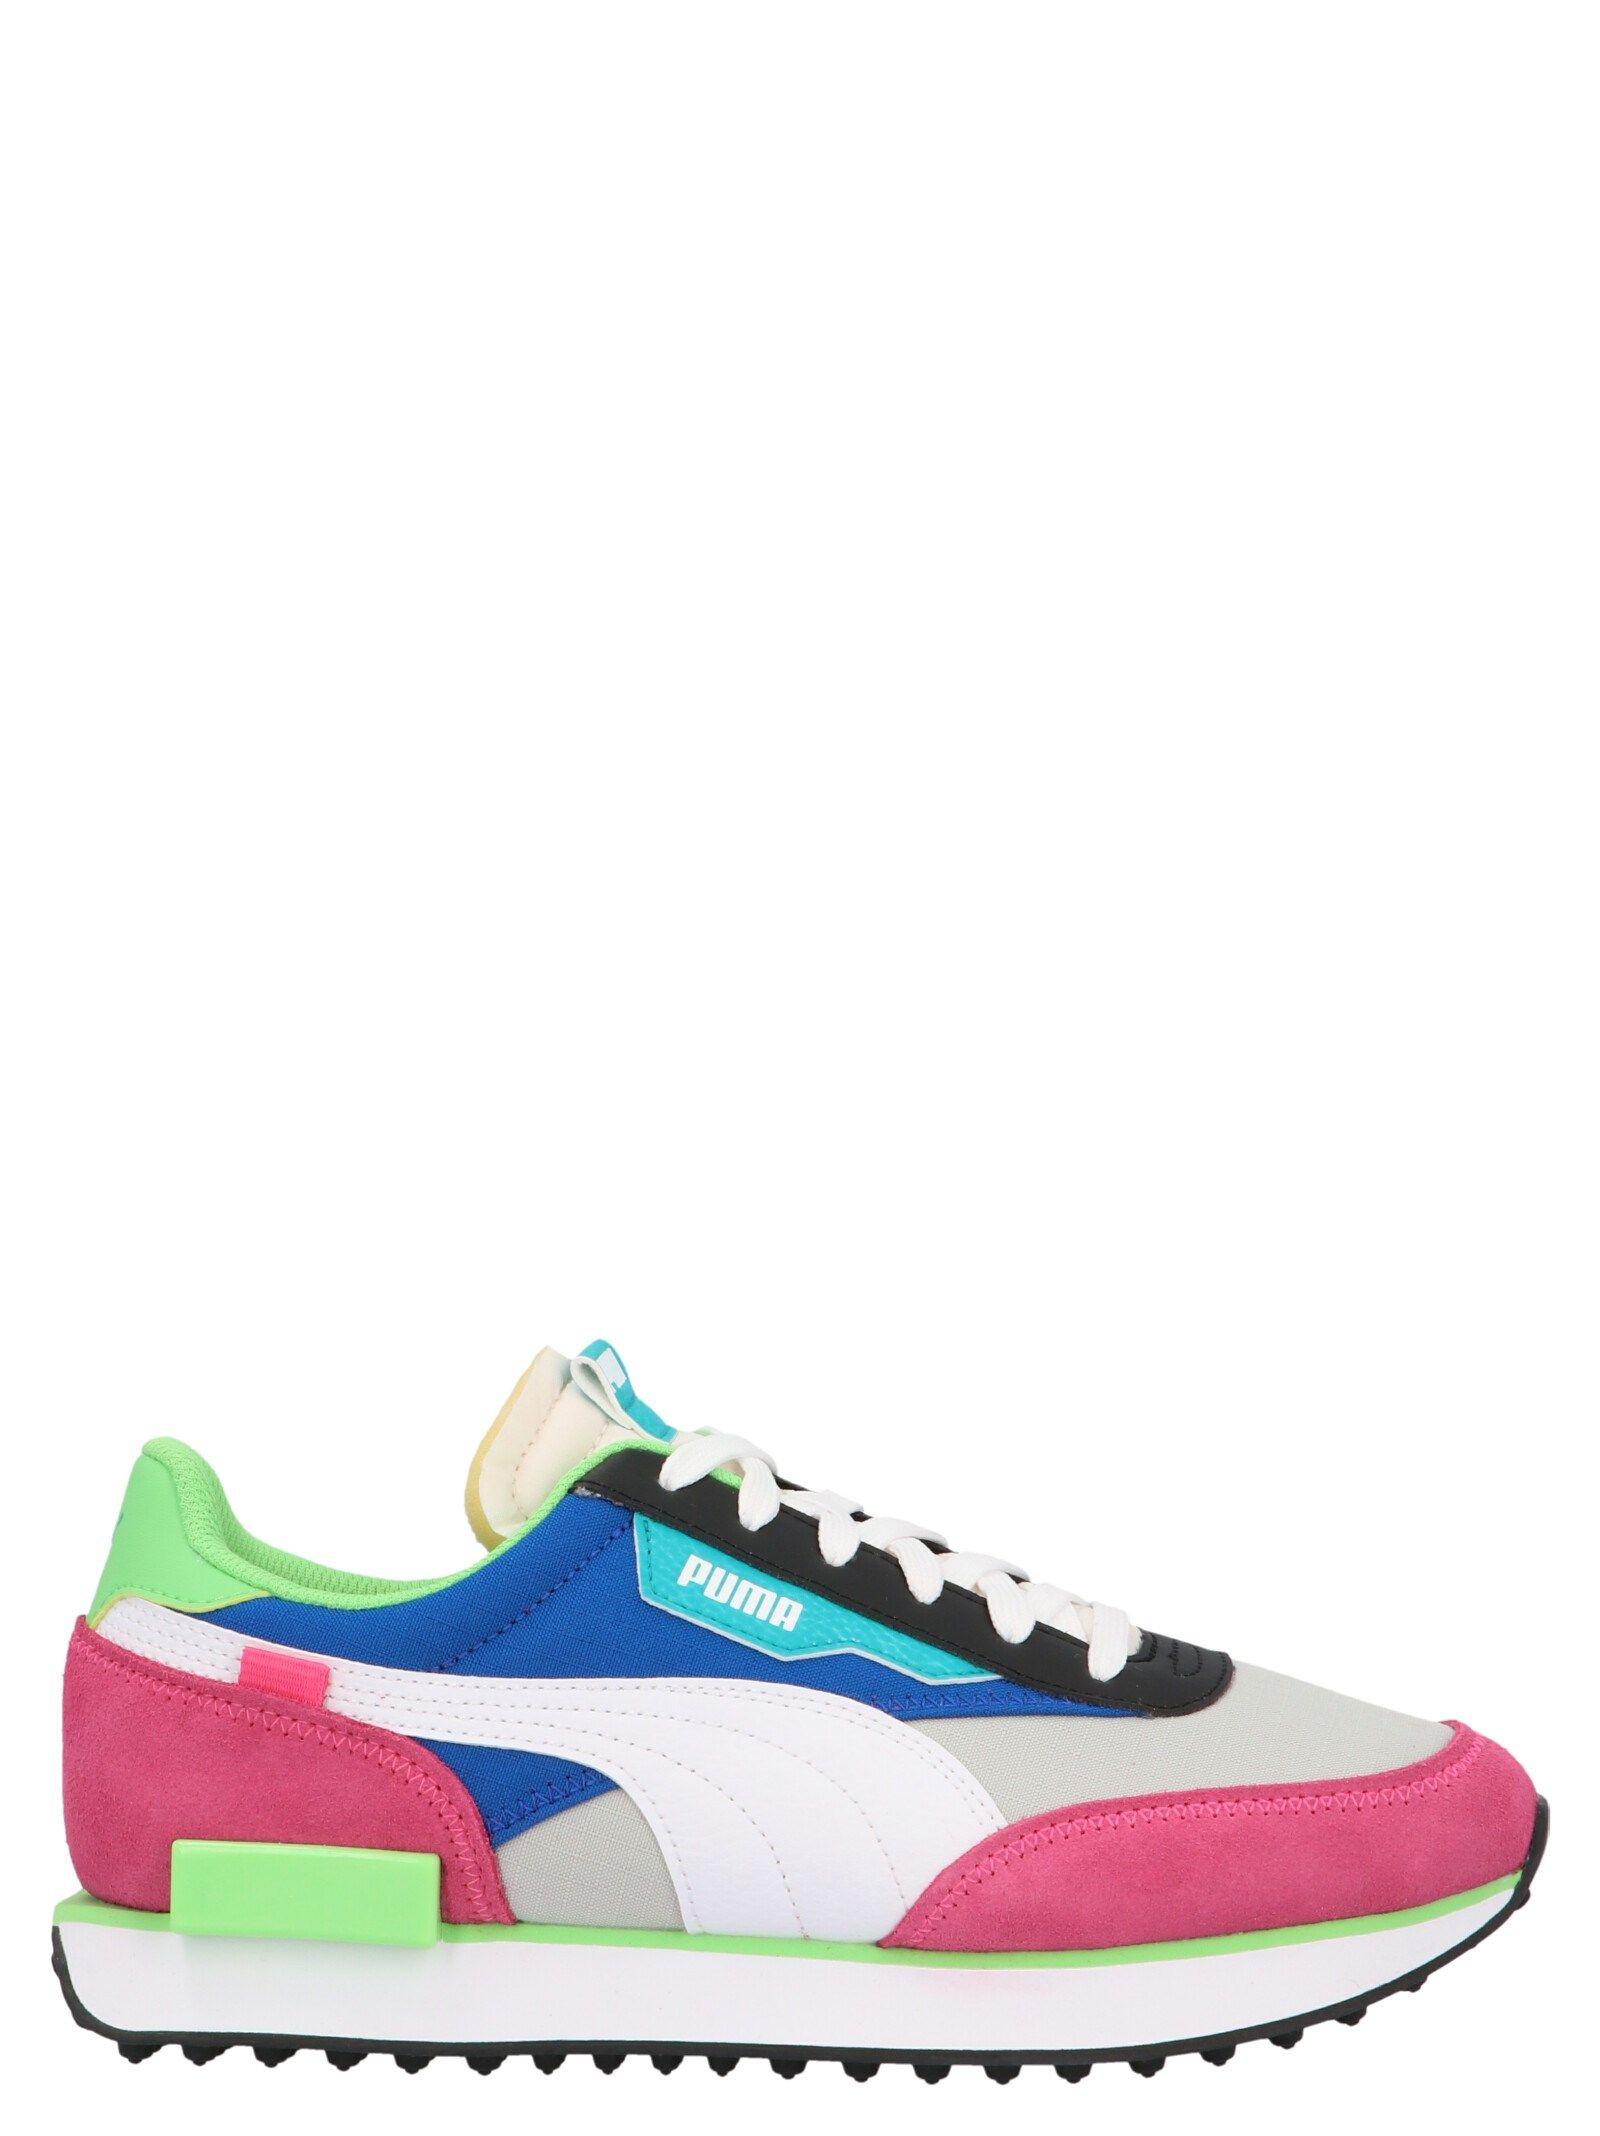 PUMA Color Other Materials Sneakers in Blue | Lyst